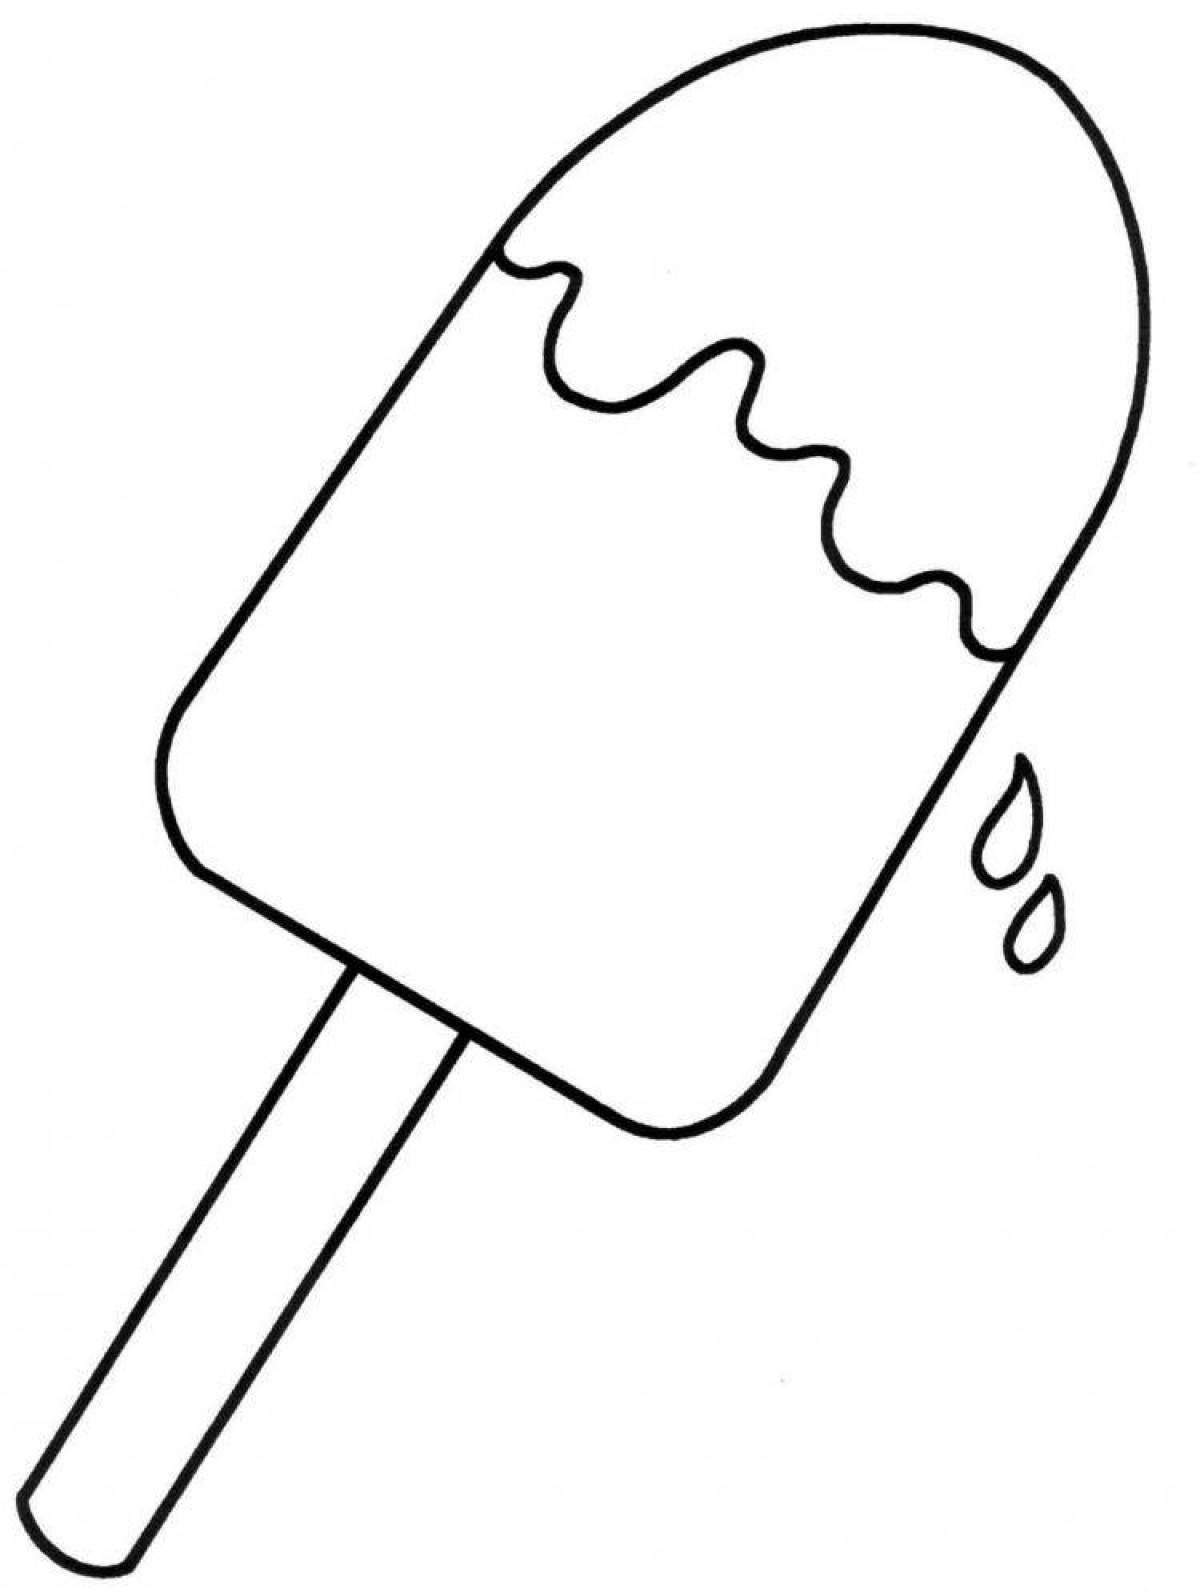 Color-tastic popsicle coloring page for kids